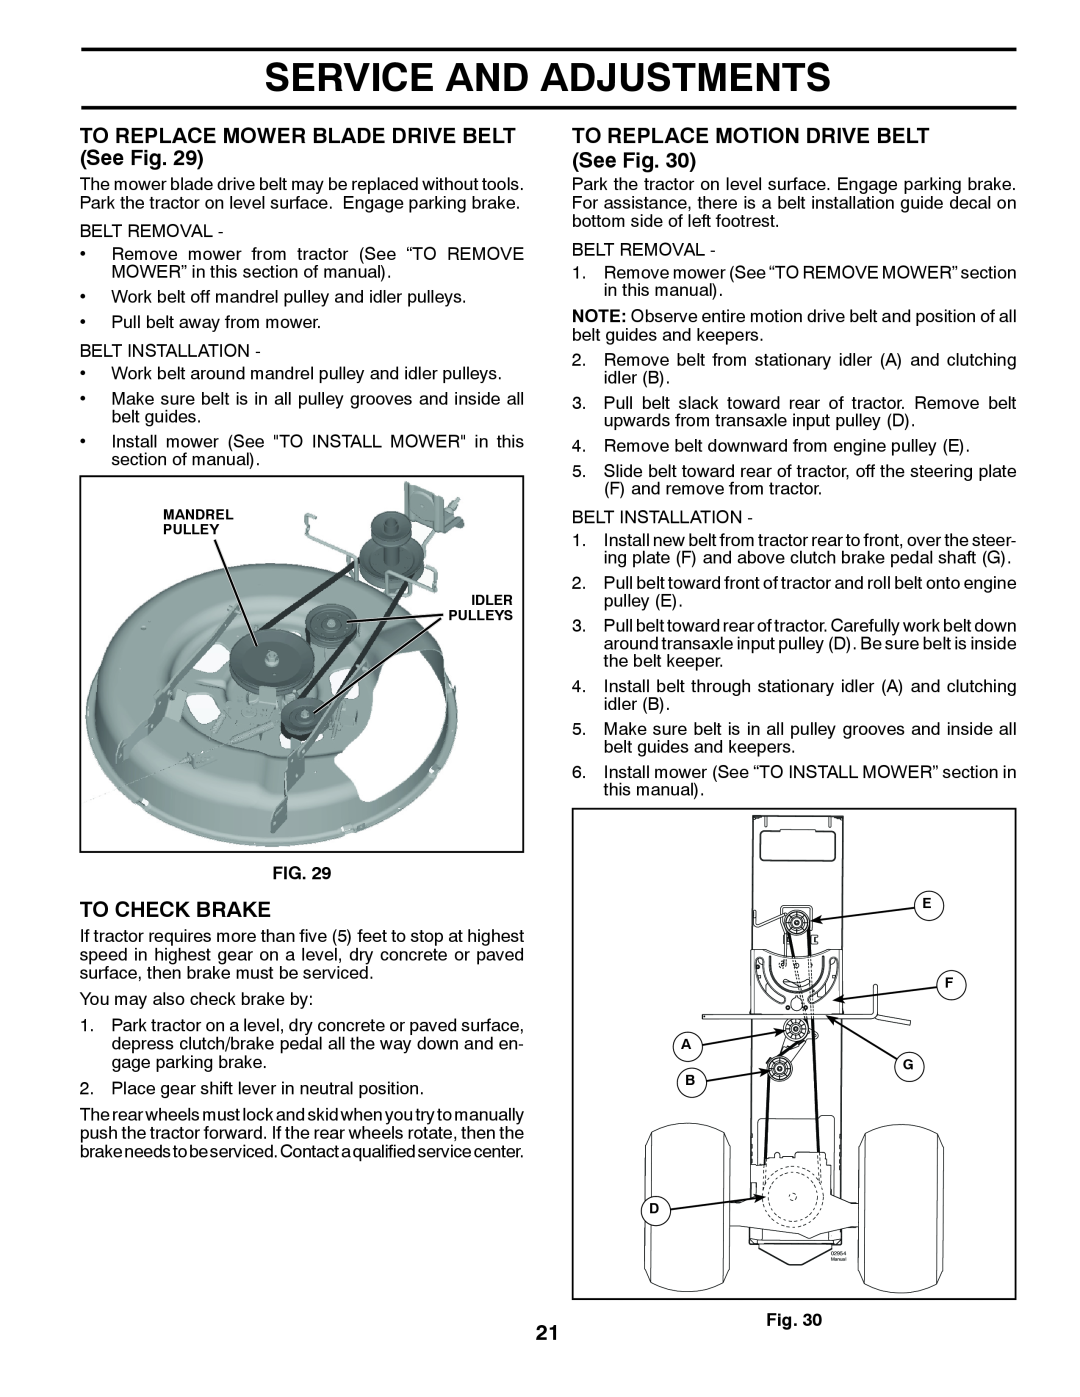 McCulloch 532 42 27-27 Rev. 2 manual Service And Adjustments, TO REPLACE MOWER BLADE DRIVE BELT See Fig, To Check Brake 